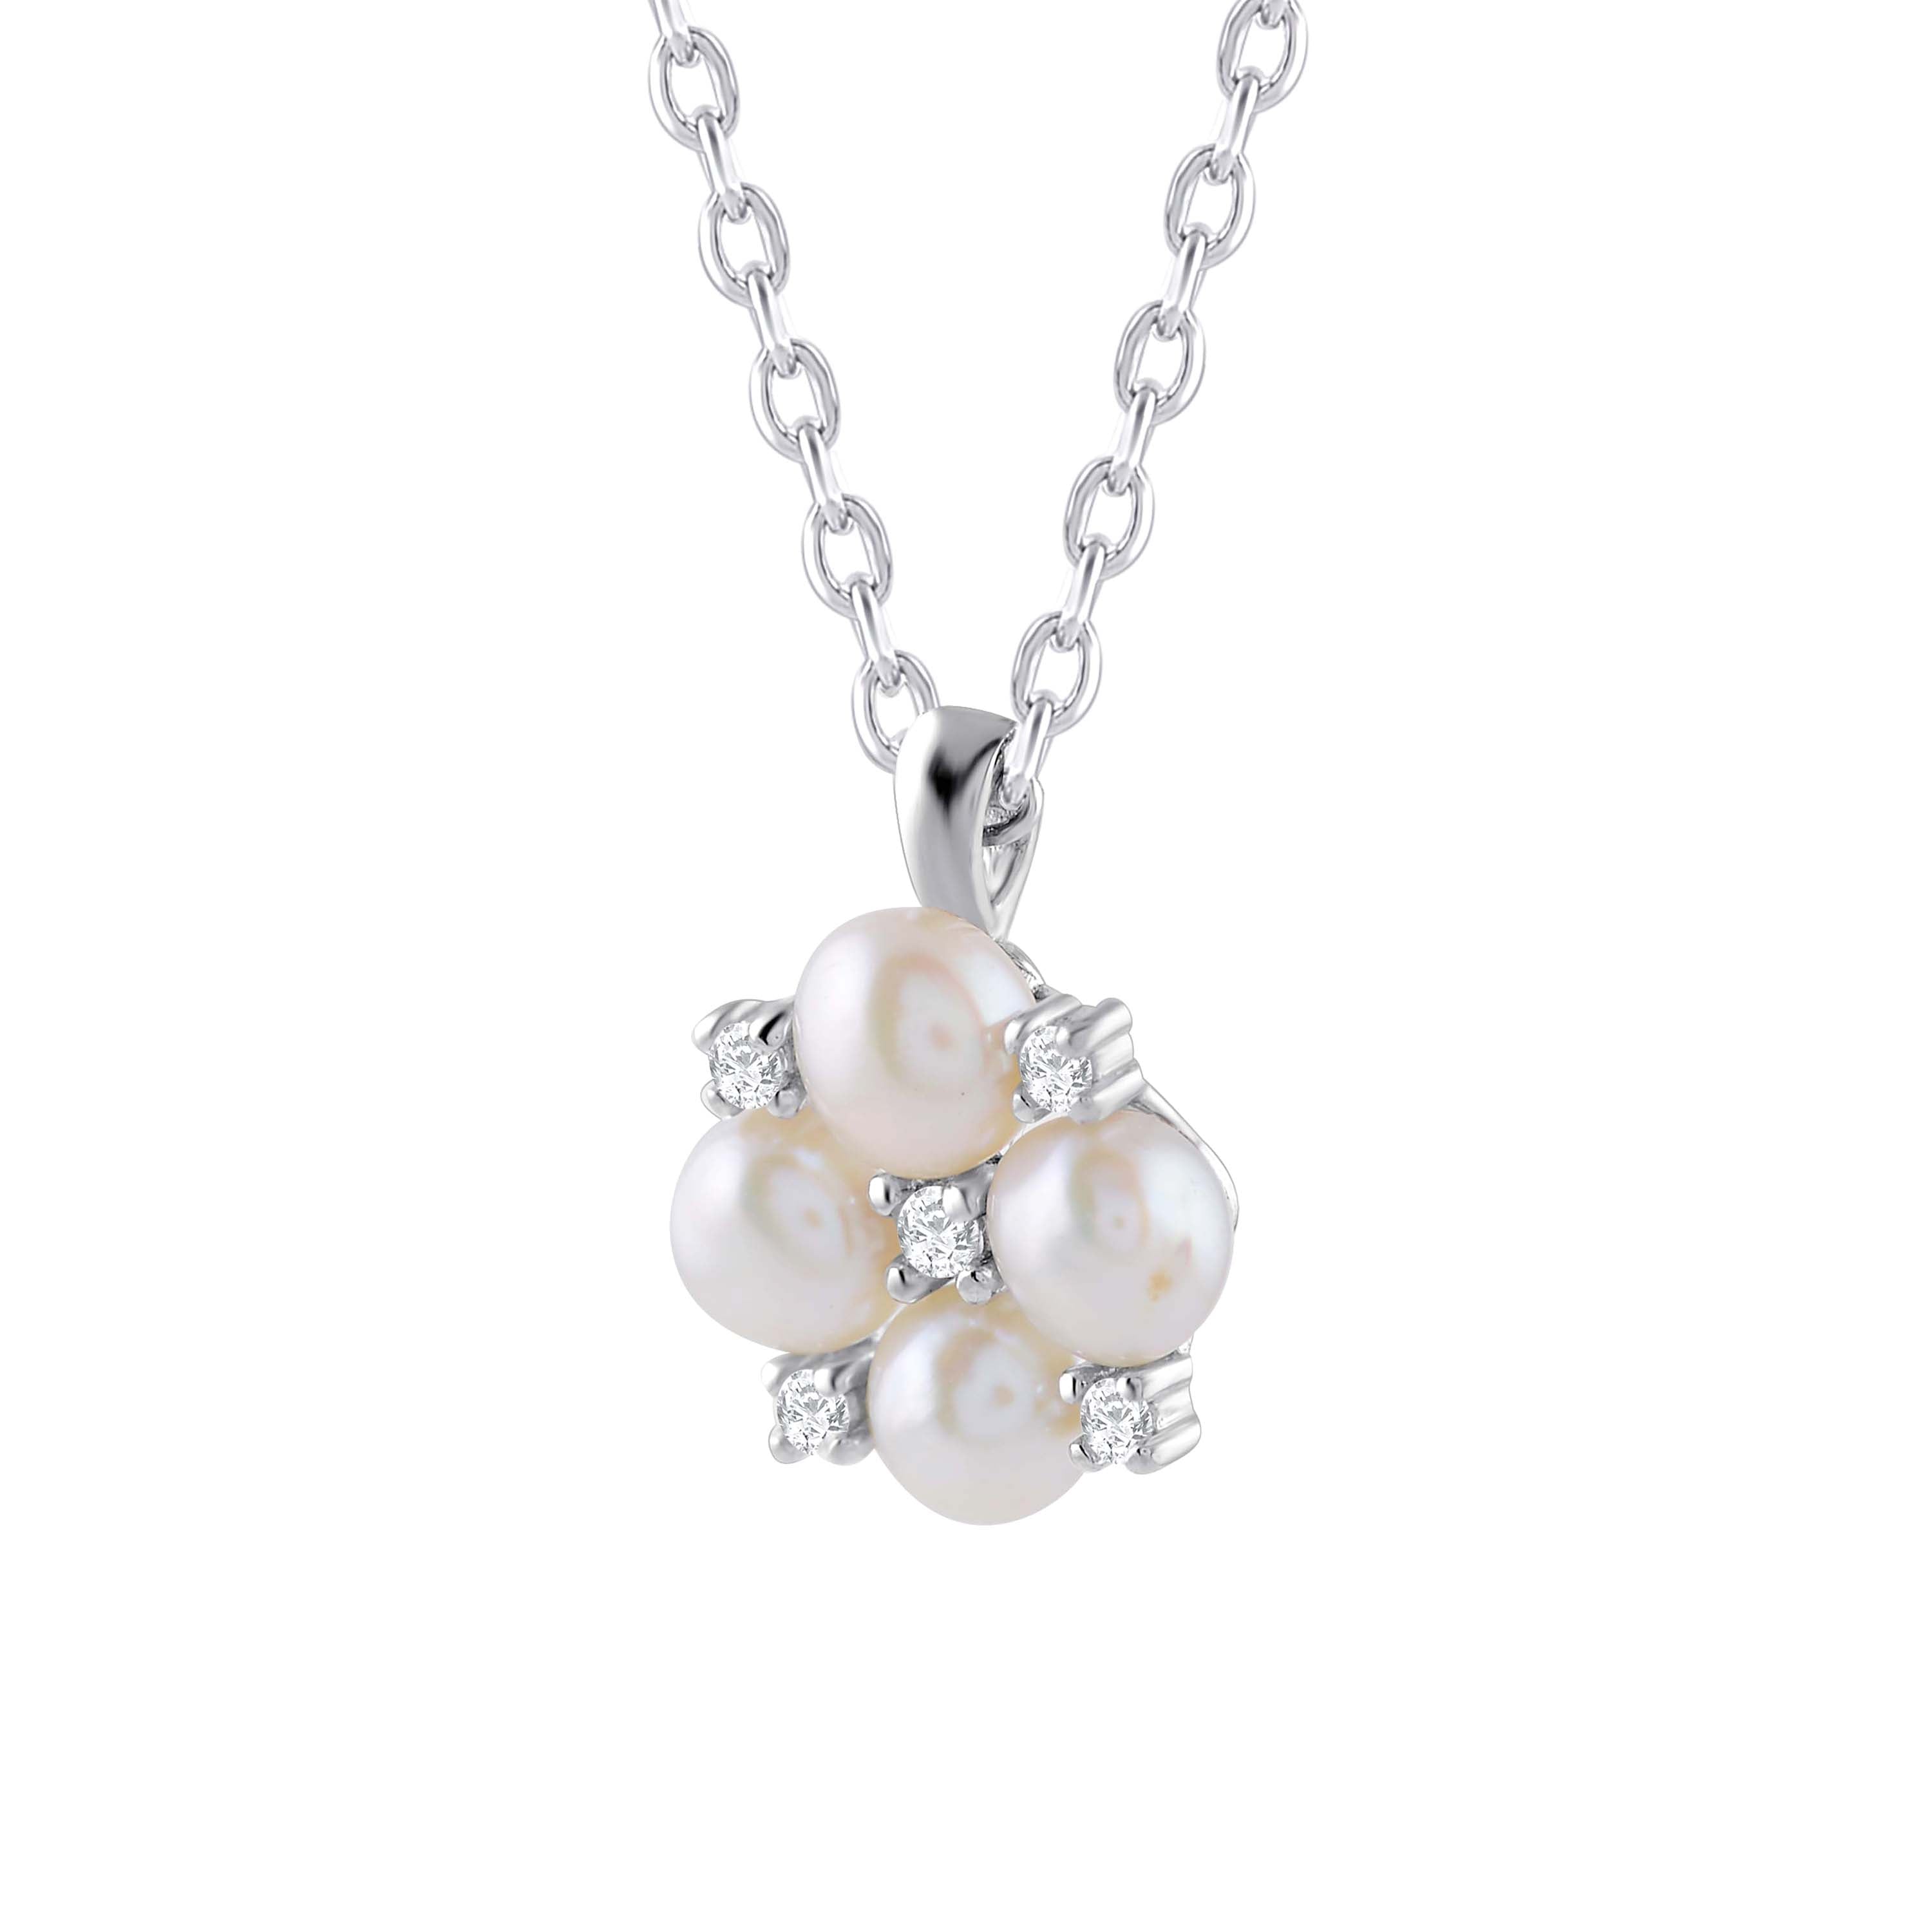 Handcrafted Flower Pearl Necklace set